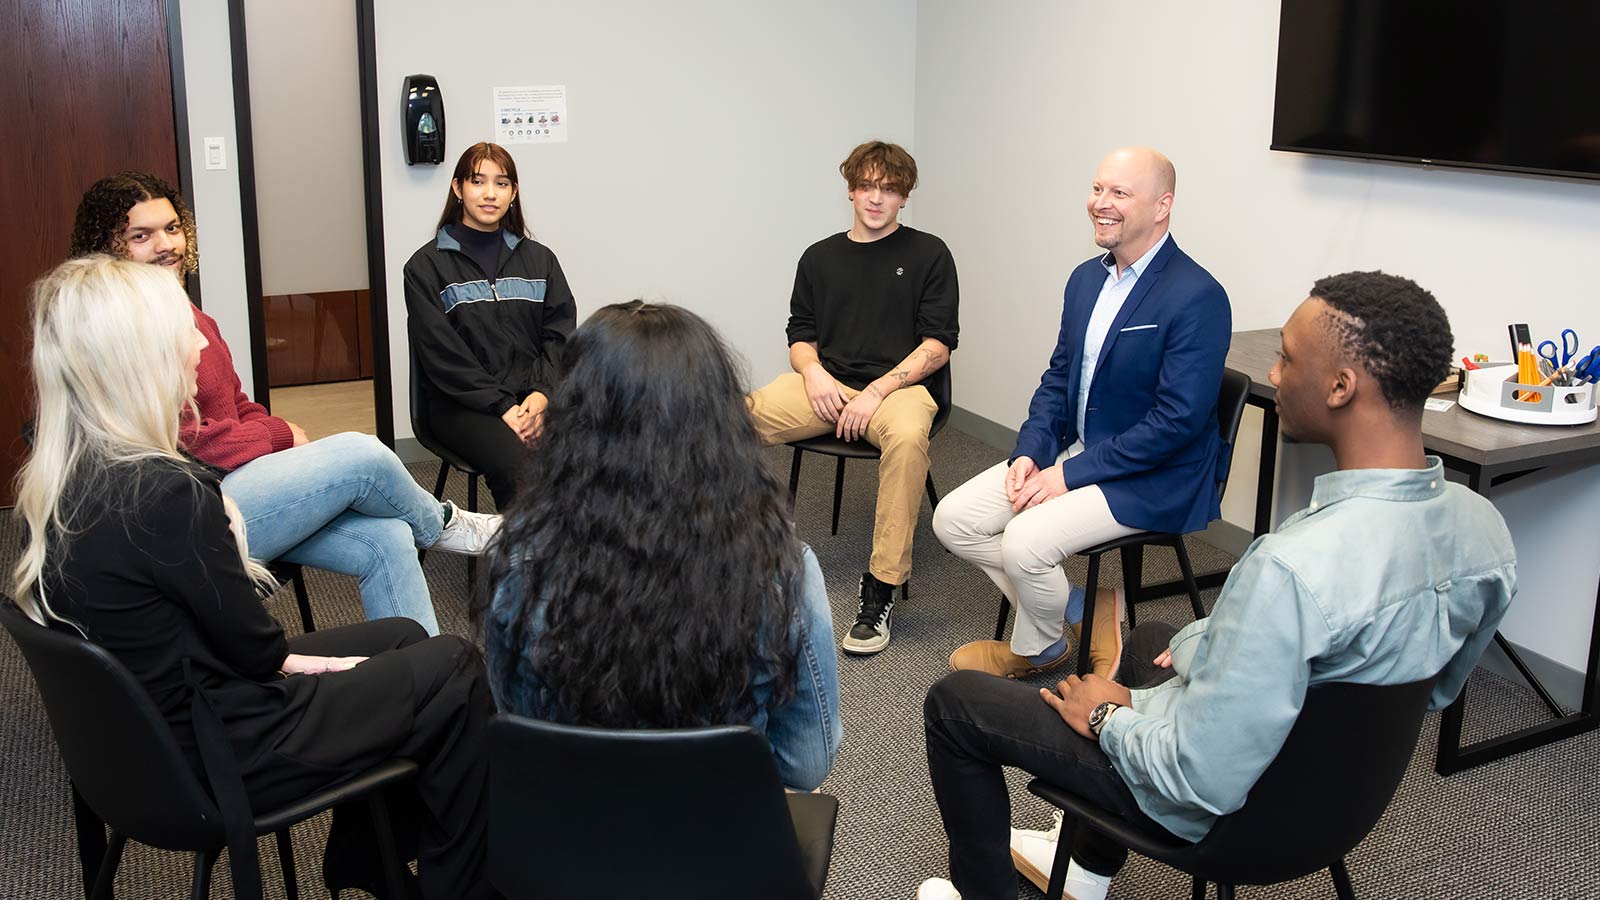 A group of young adults seated in a circle during a group session, smiling and engaging with a counselor.